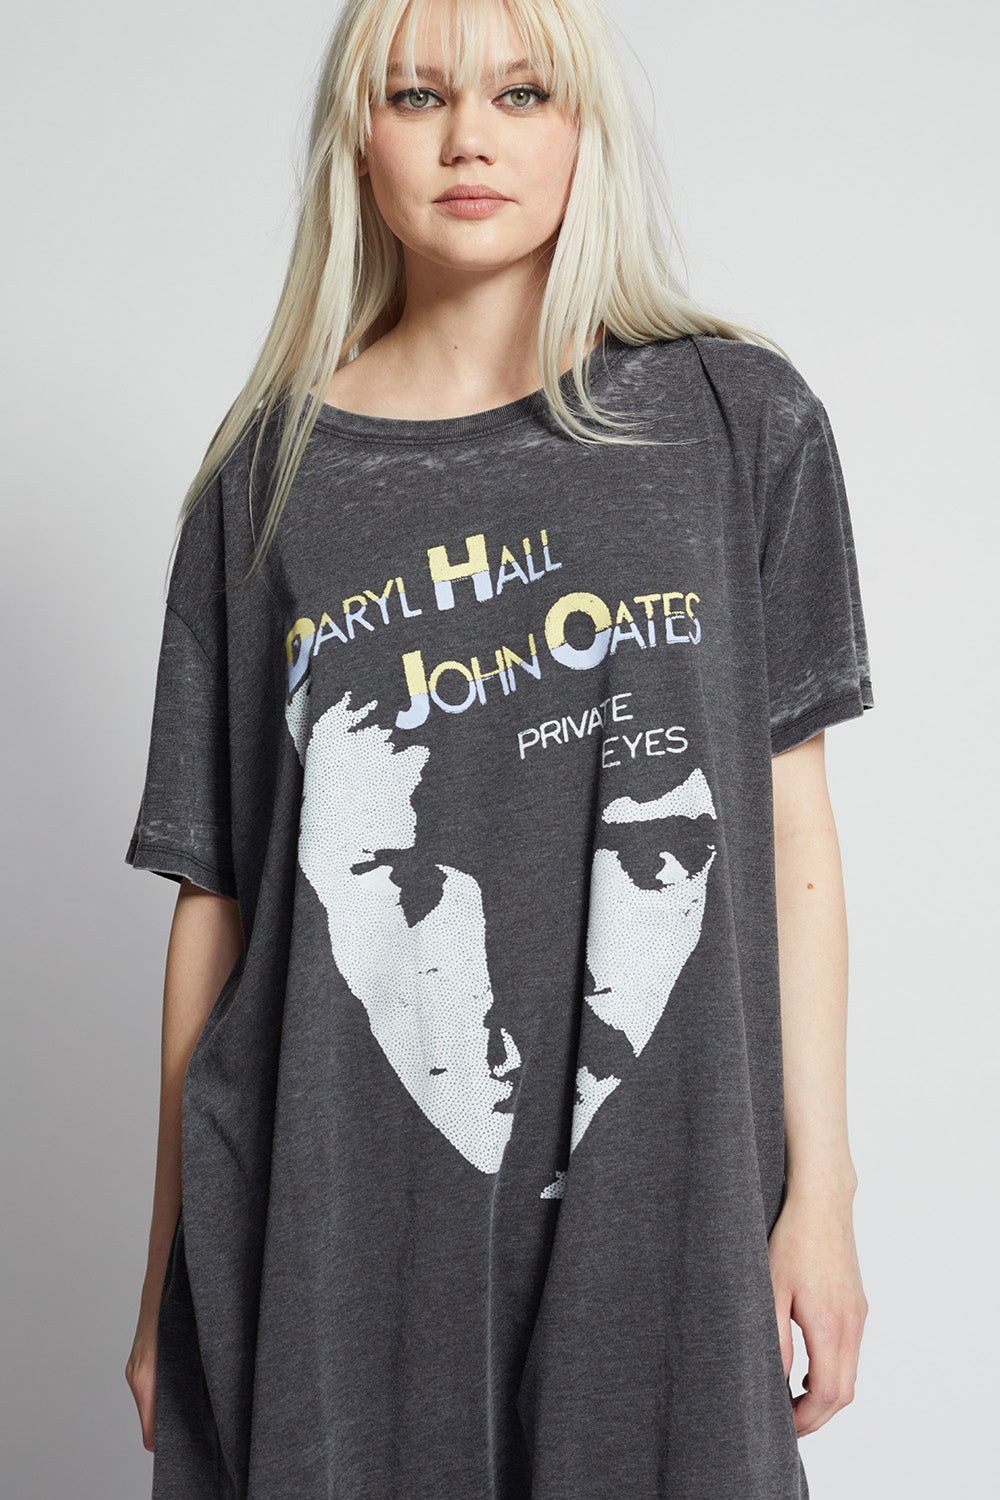 Hall & Oates Private Eyes One Size Dress